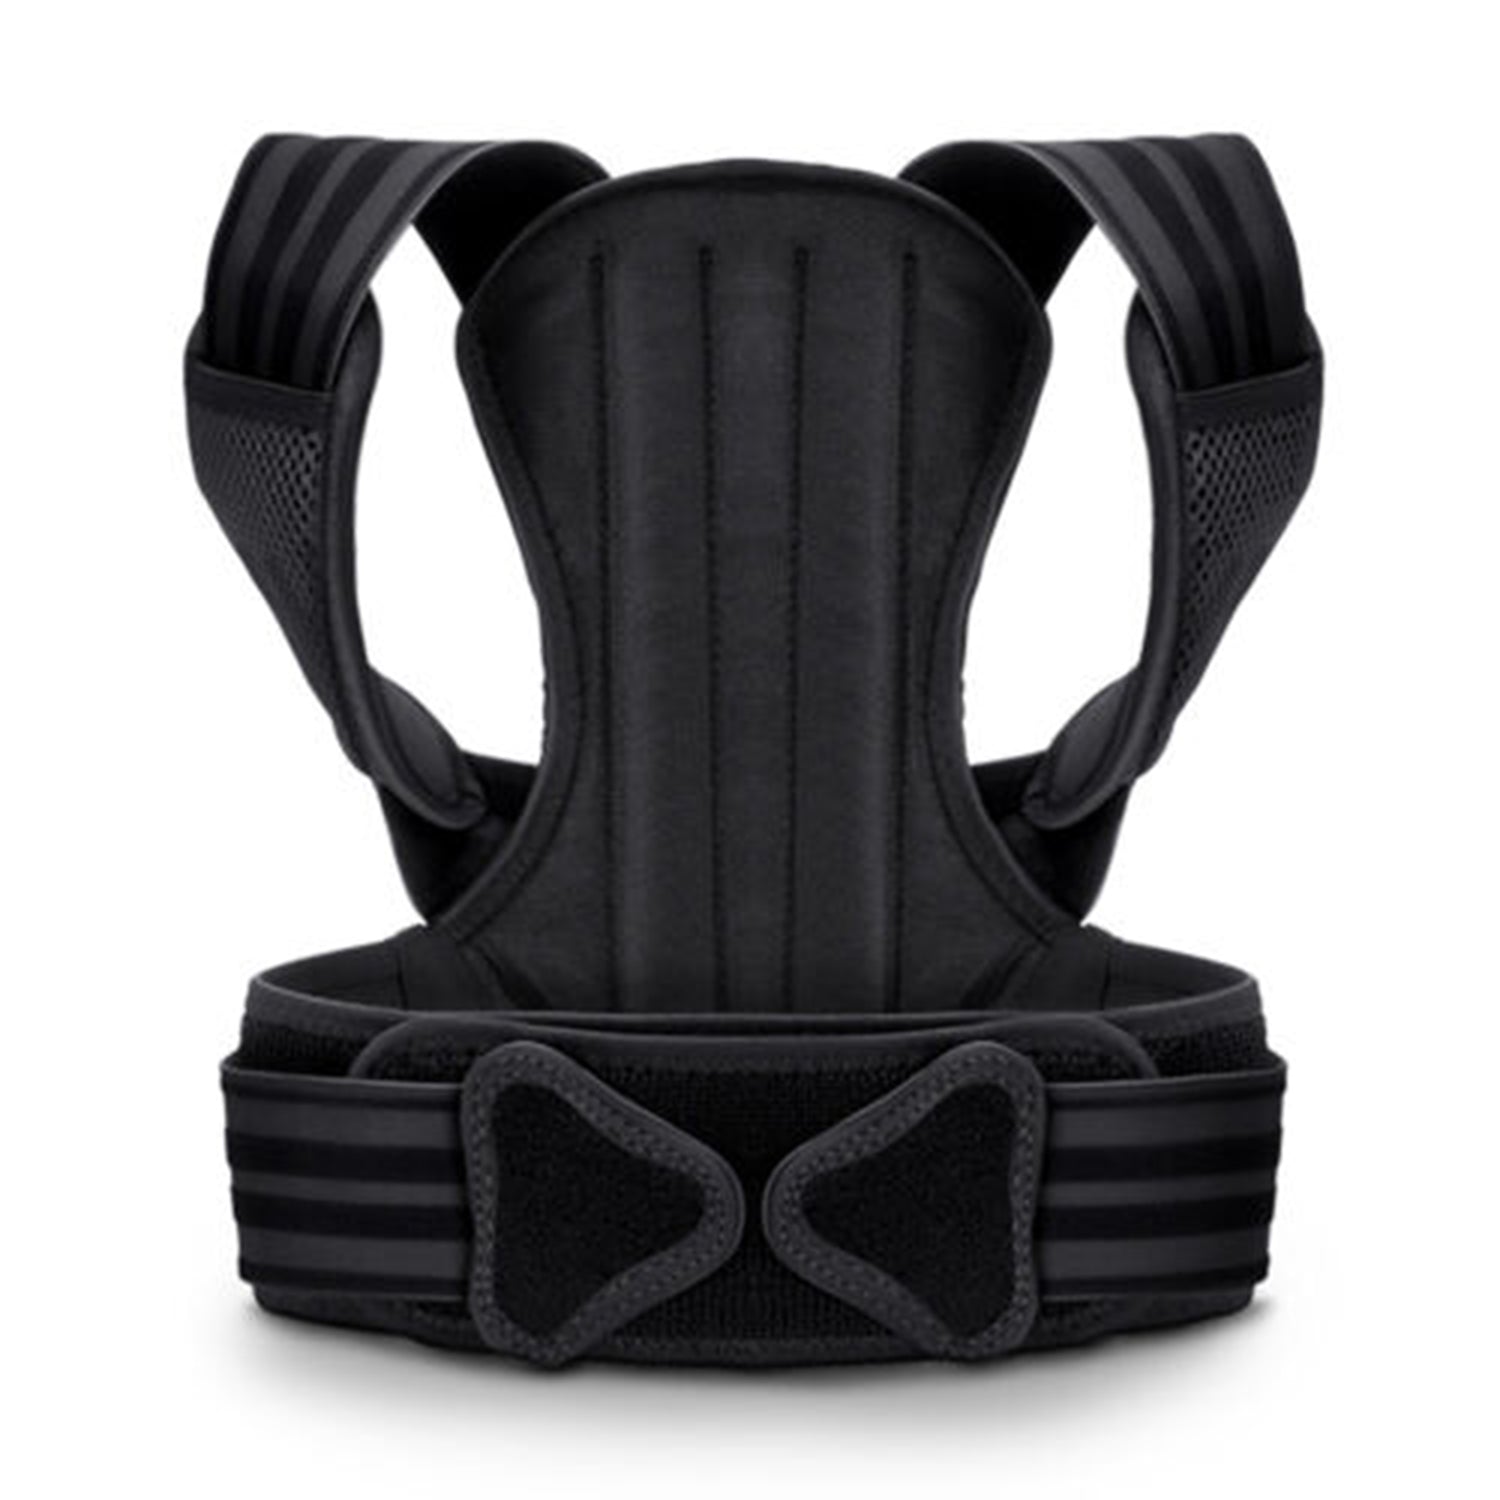 Support Belt for Low Back Pain